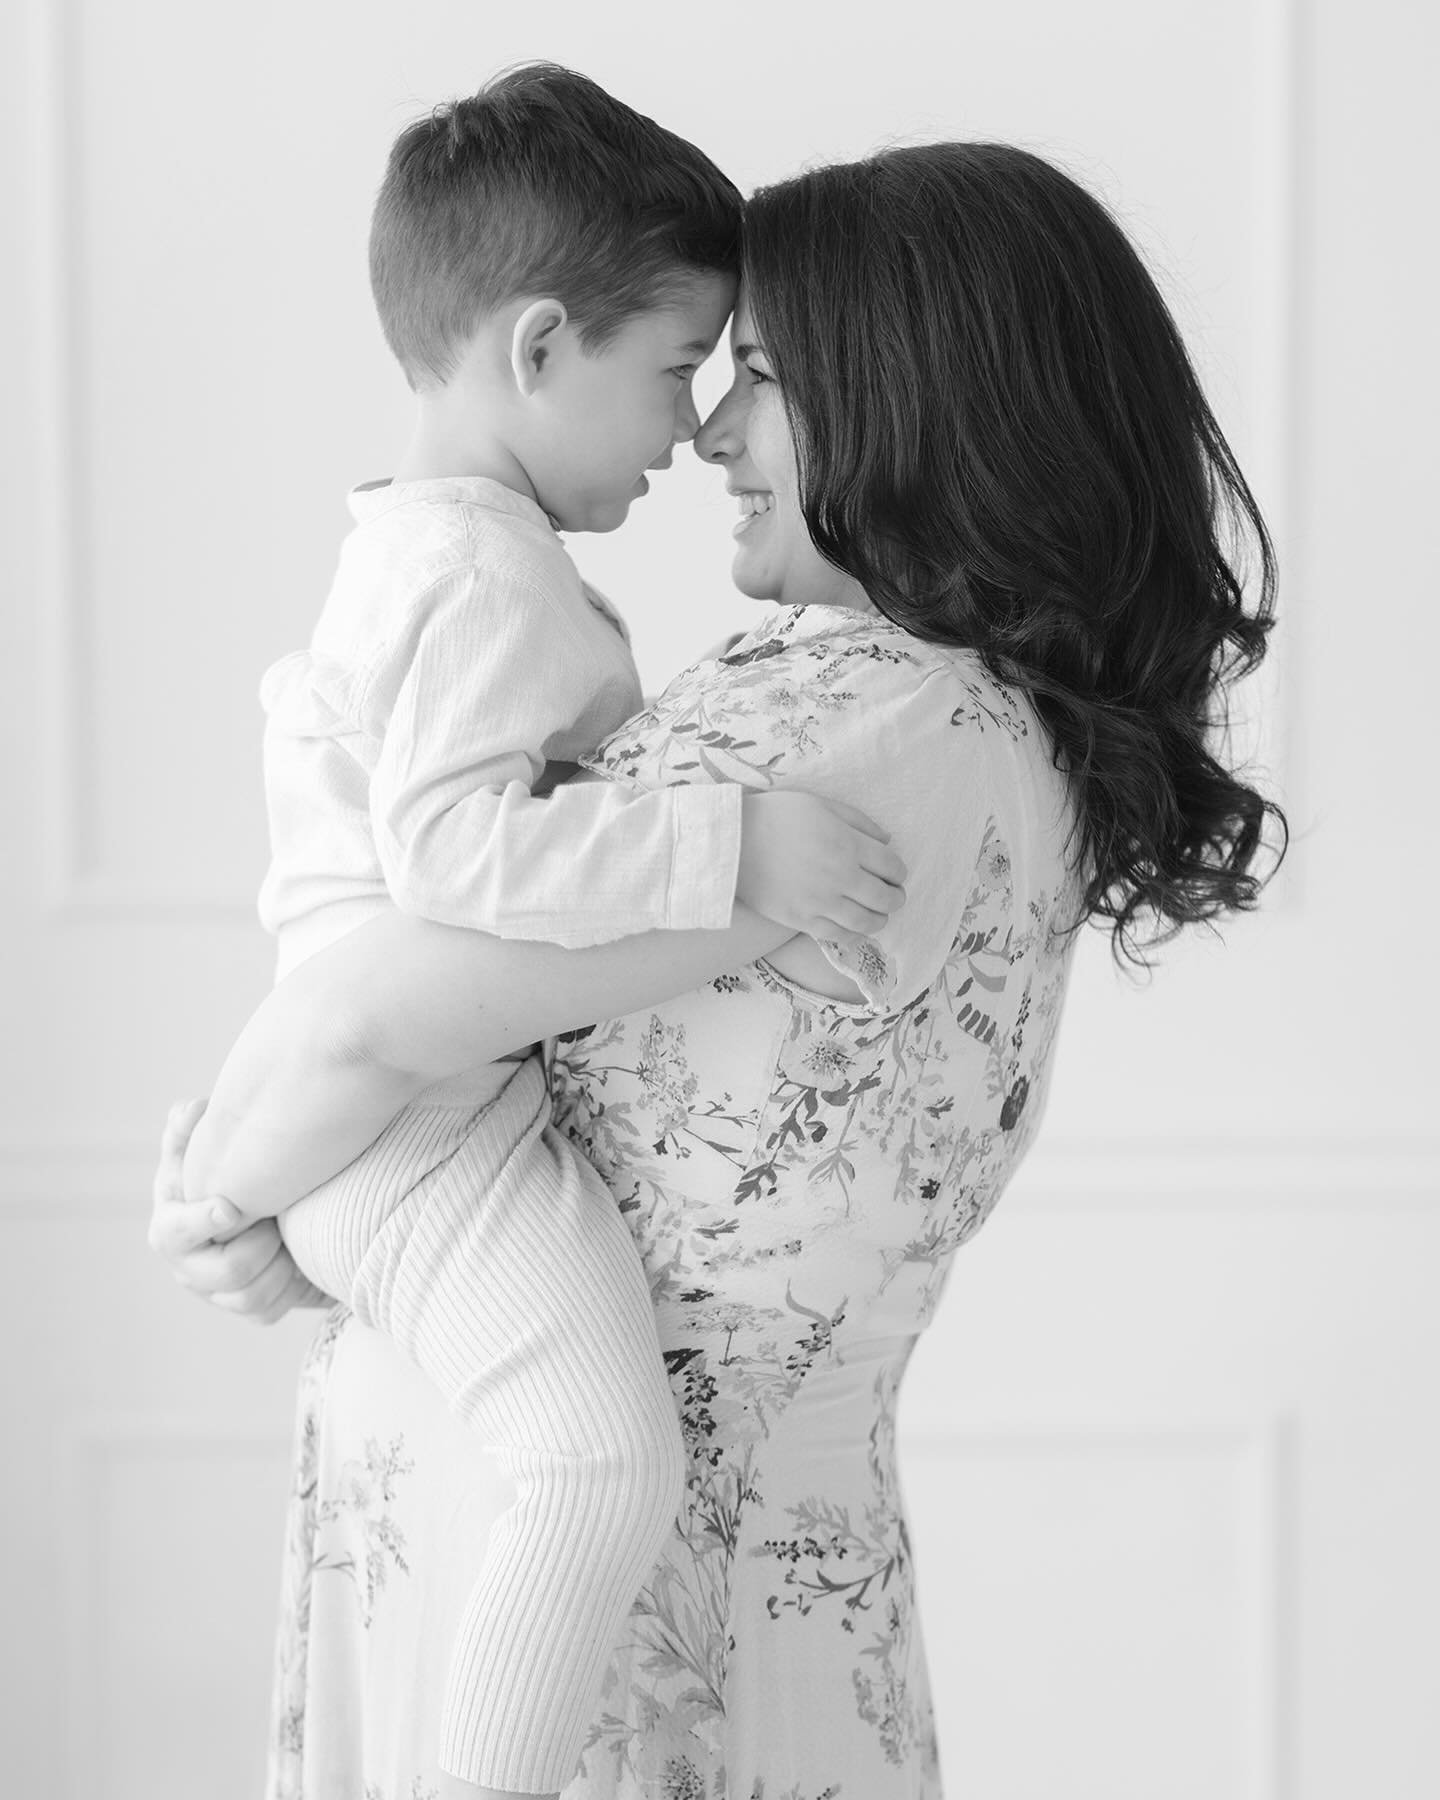 I feel super lucky to get to photograph so moments like these. They are so fleeting and deserve to be cherished &amp; documented. 

There are so many feelings that come with motherhood that you just can't put into words.  However you celebrate or hib